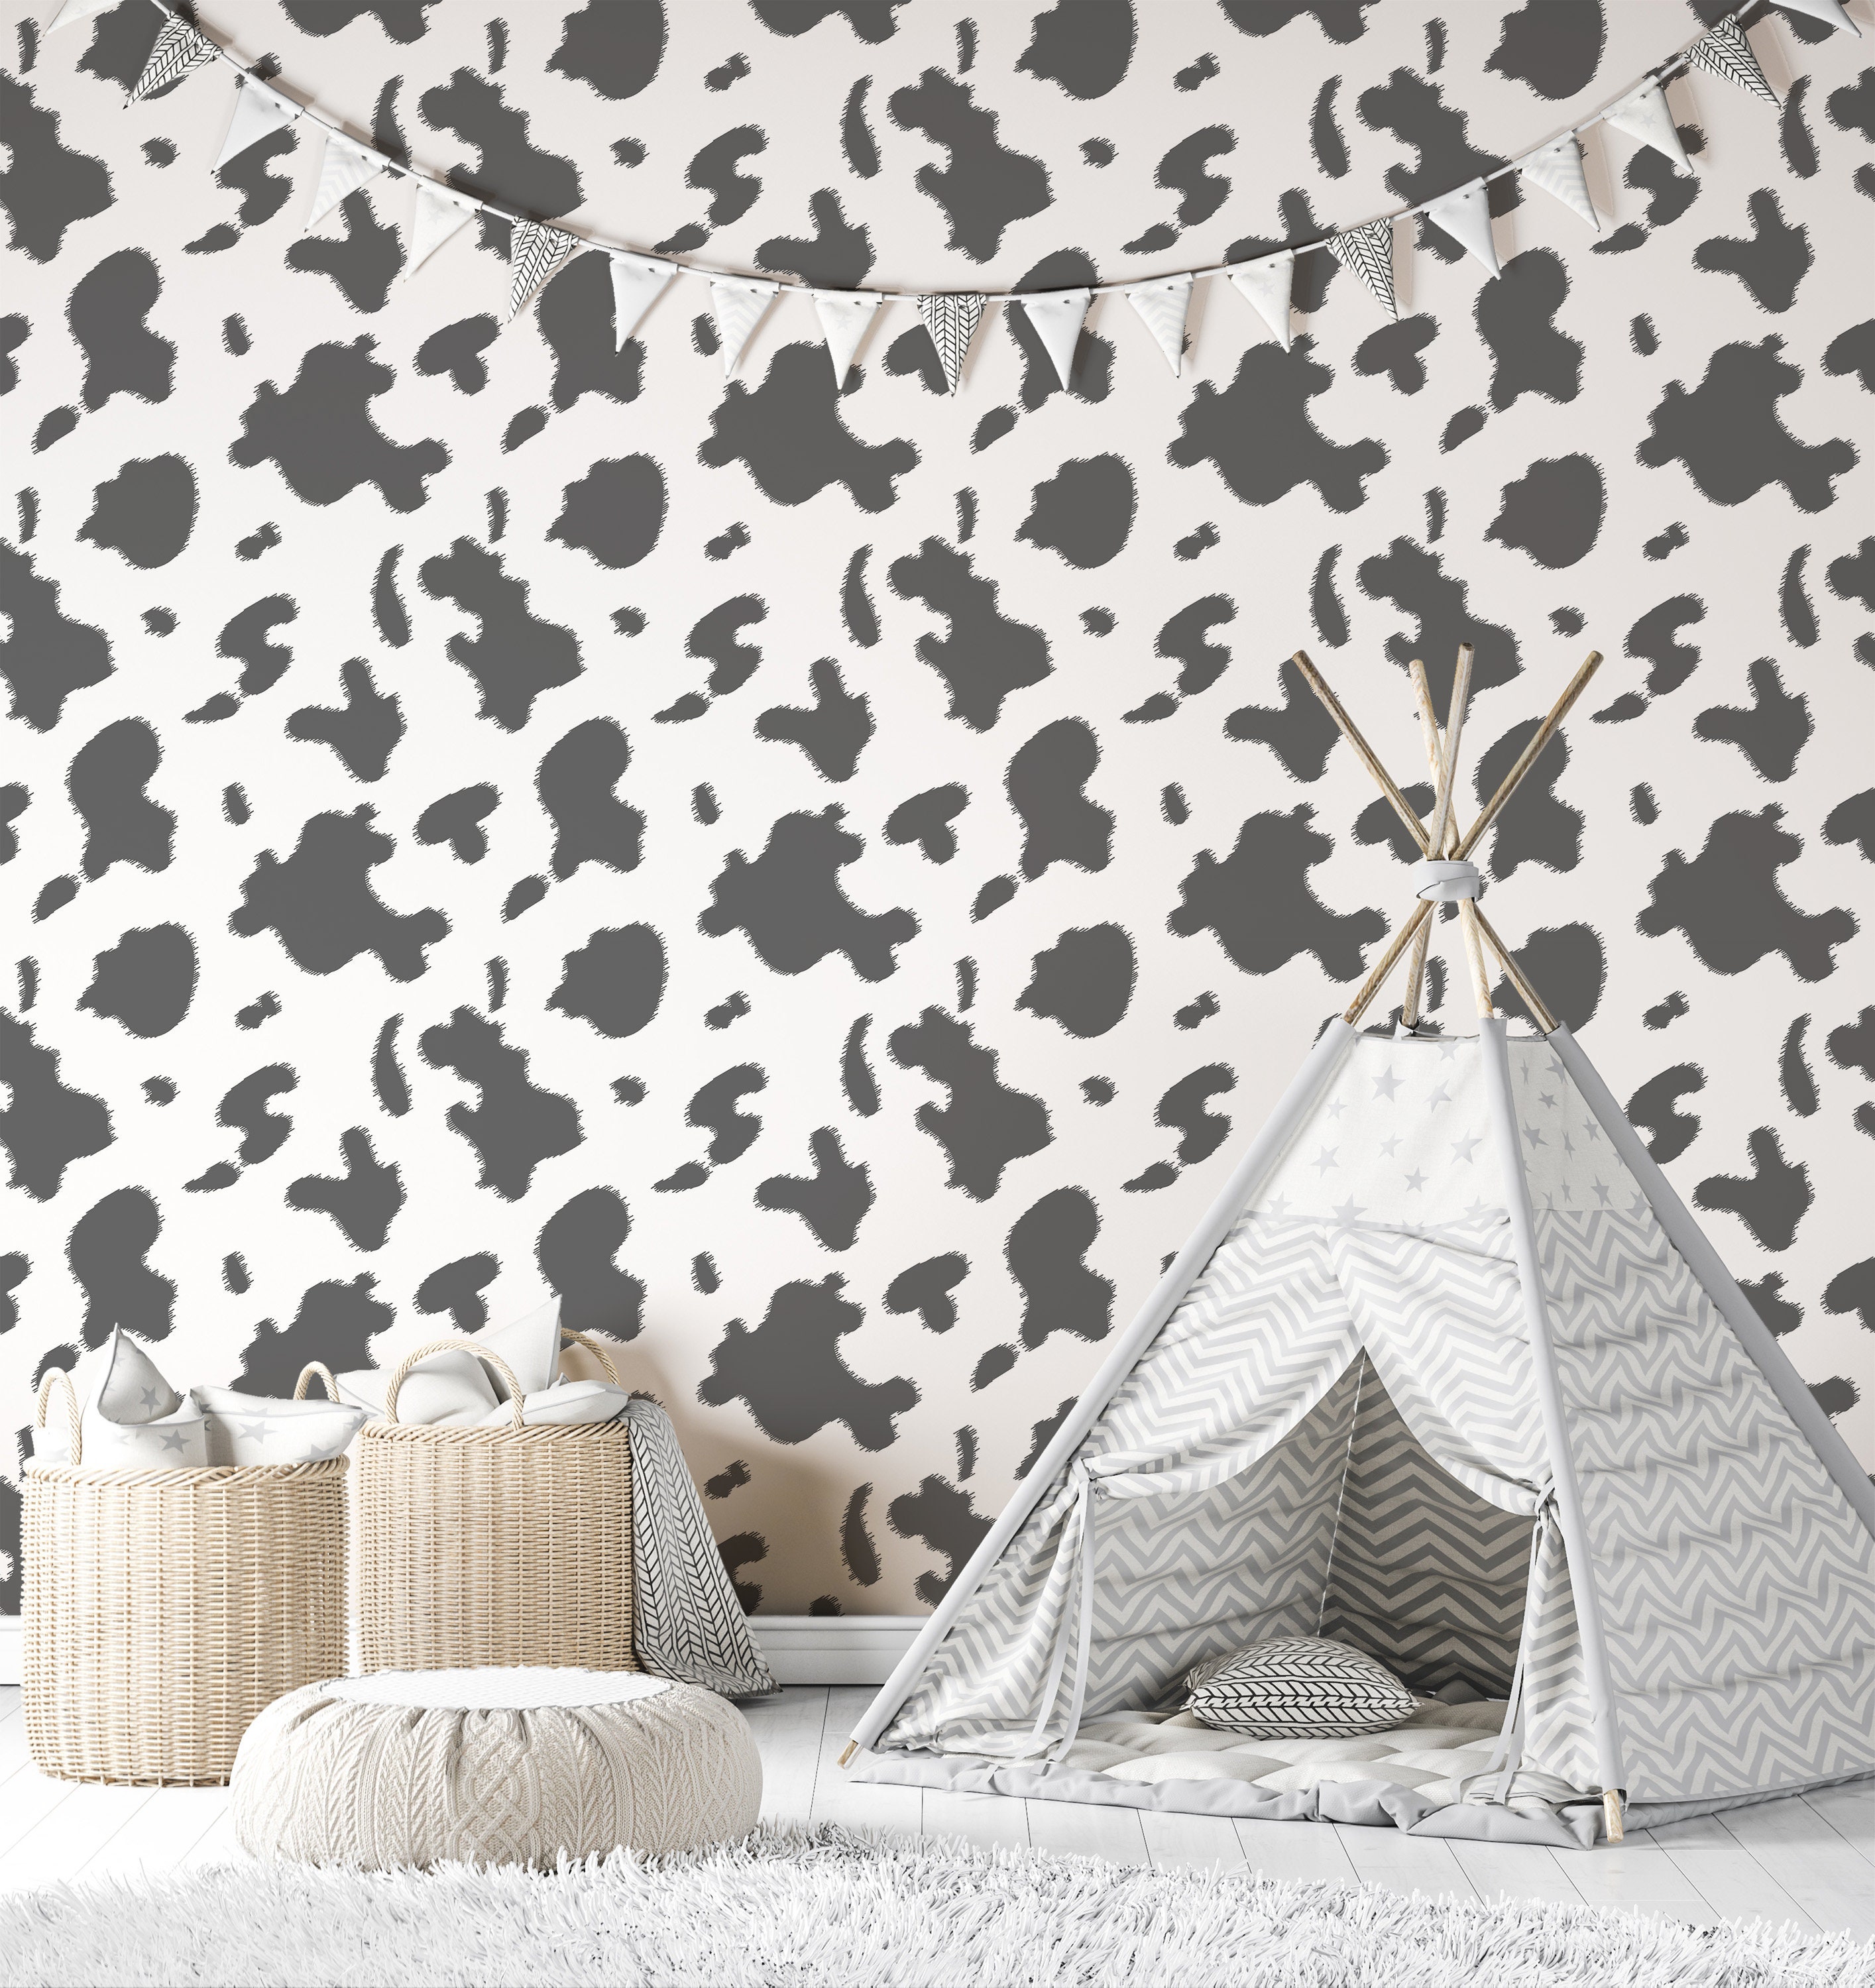 LIFAVOVY Removable Wall Paper Peel and Stick Wallpaper Cow Print Decorative  Self Adhesive Shelf Liner Roll 17.7 x 393